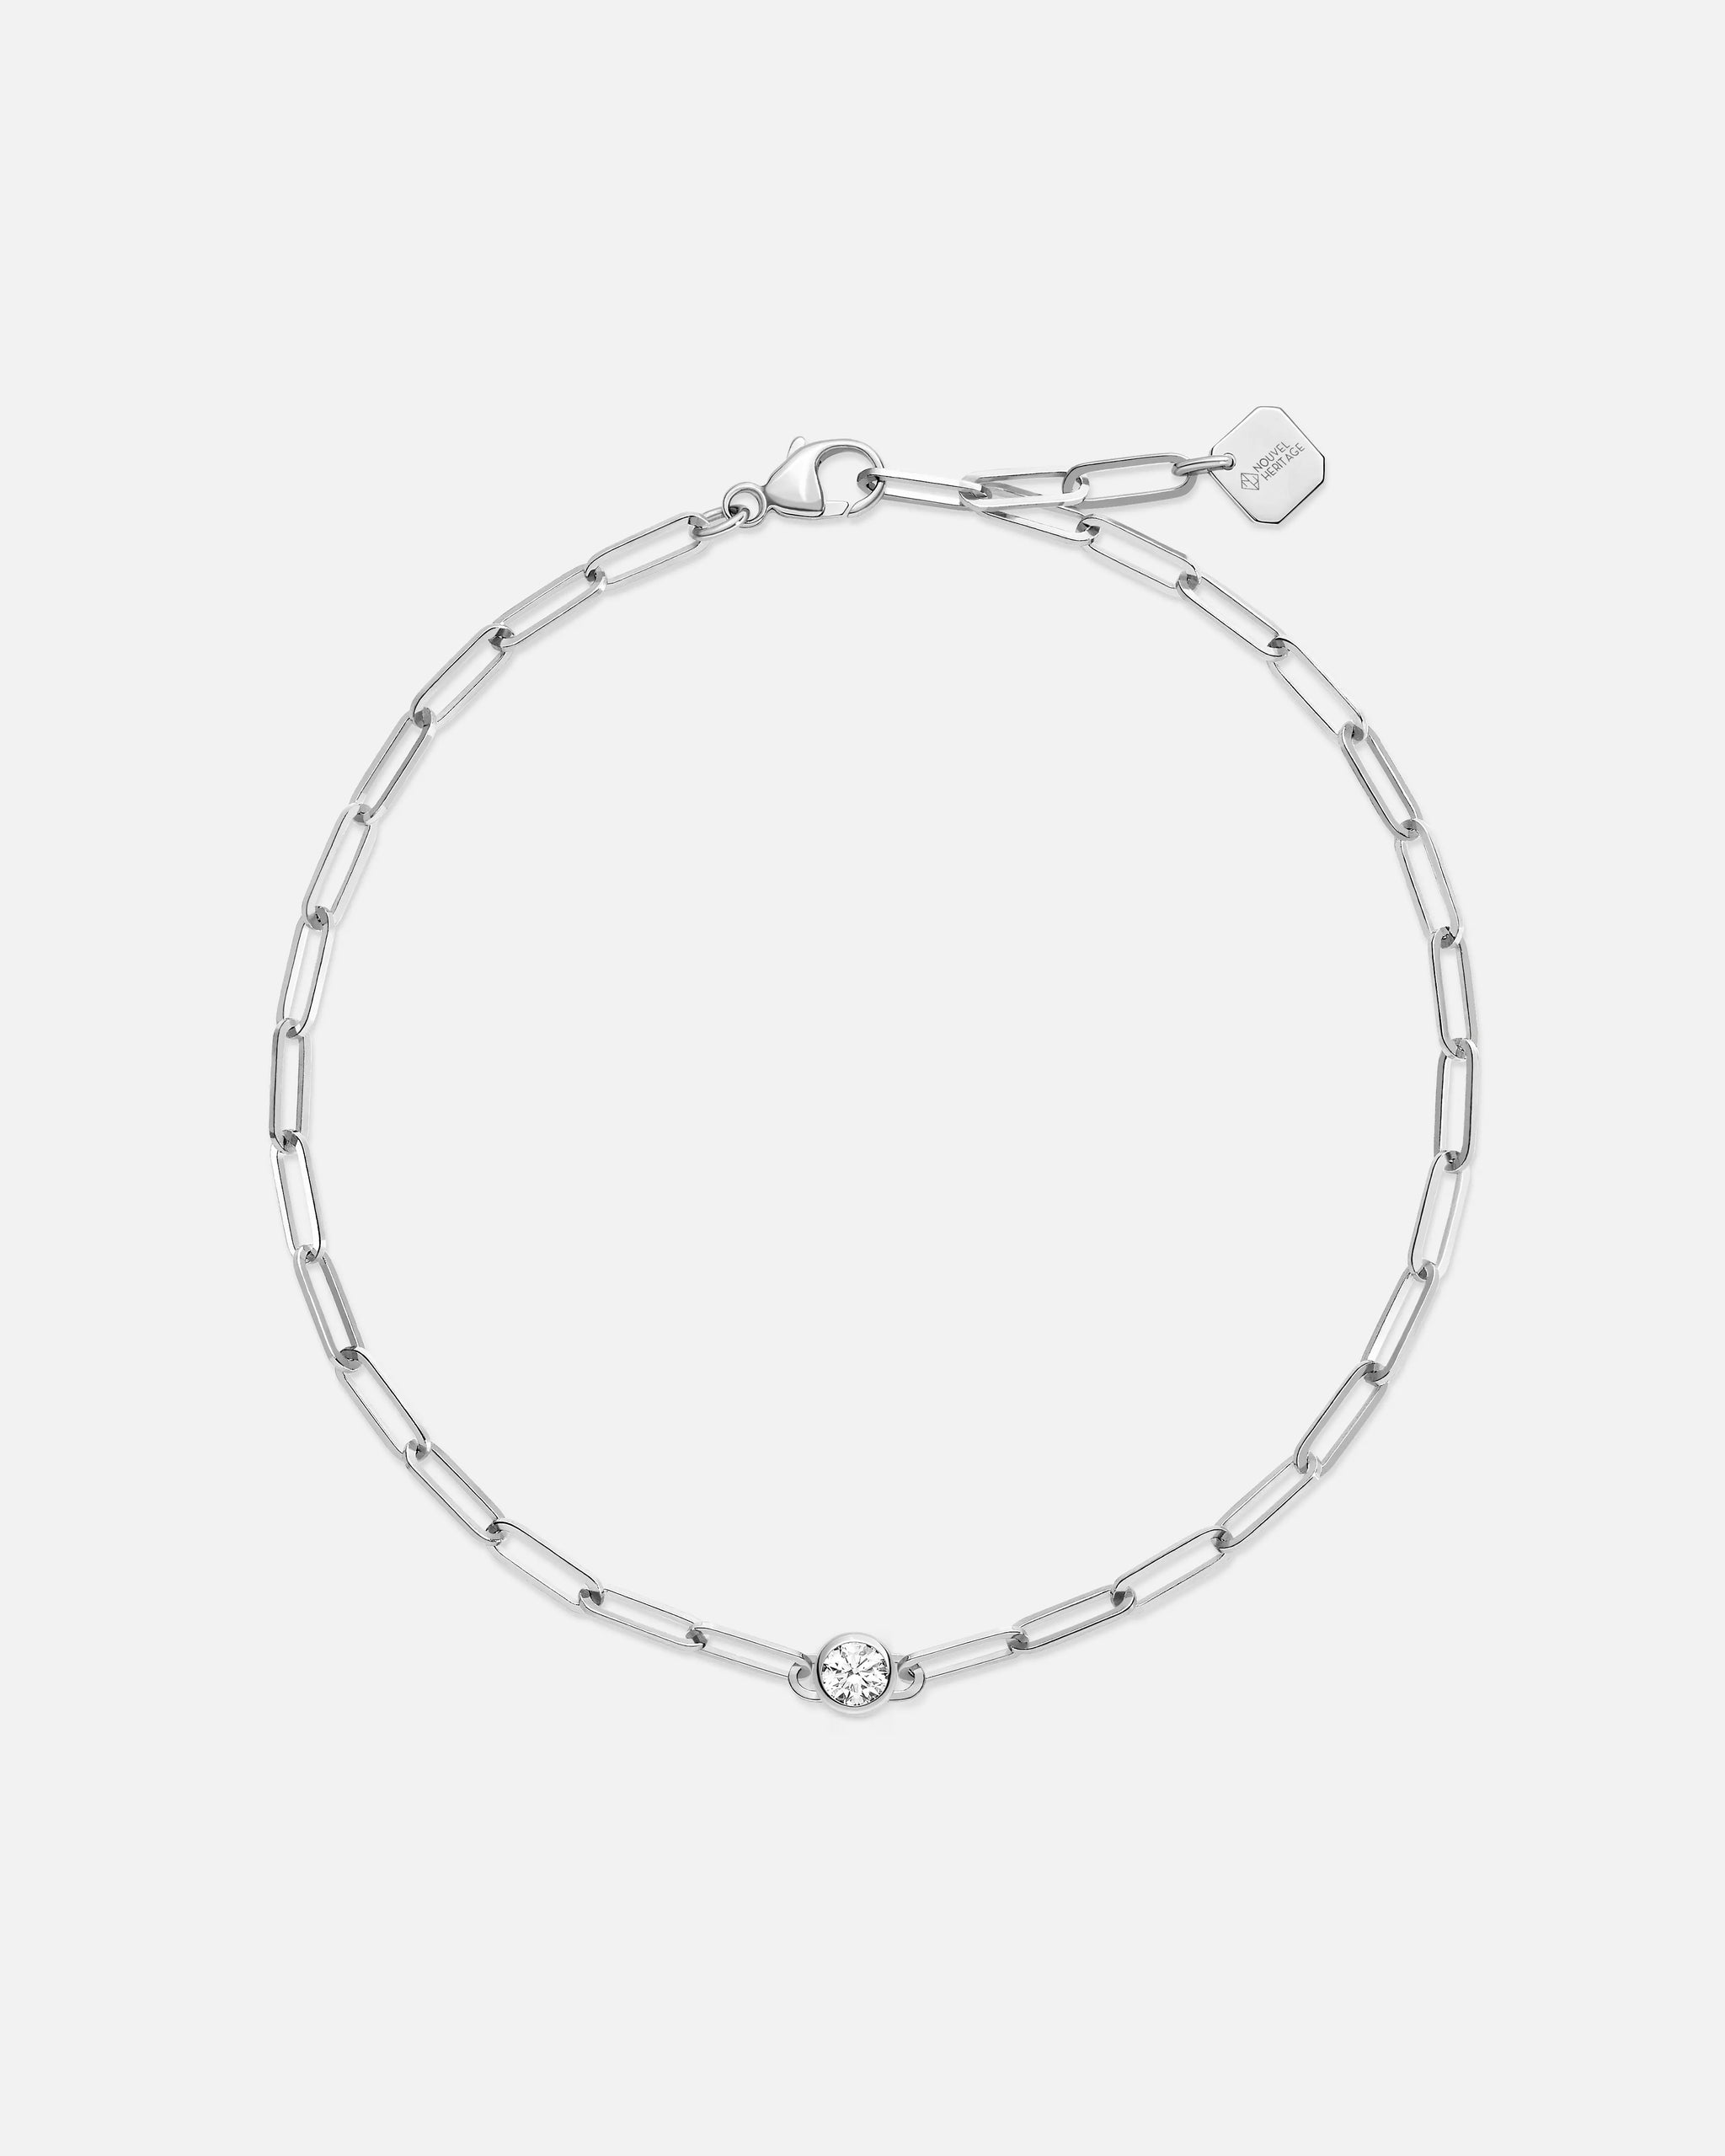 Round Classics Bracelet in White Gold - 1 - Nouvel Heritage